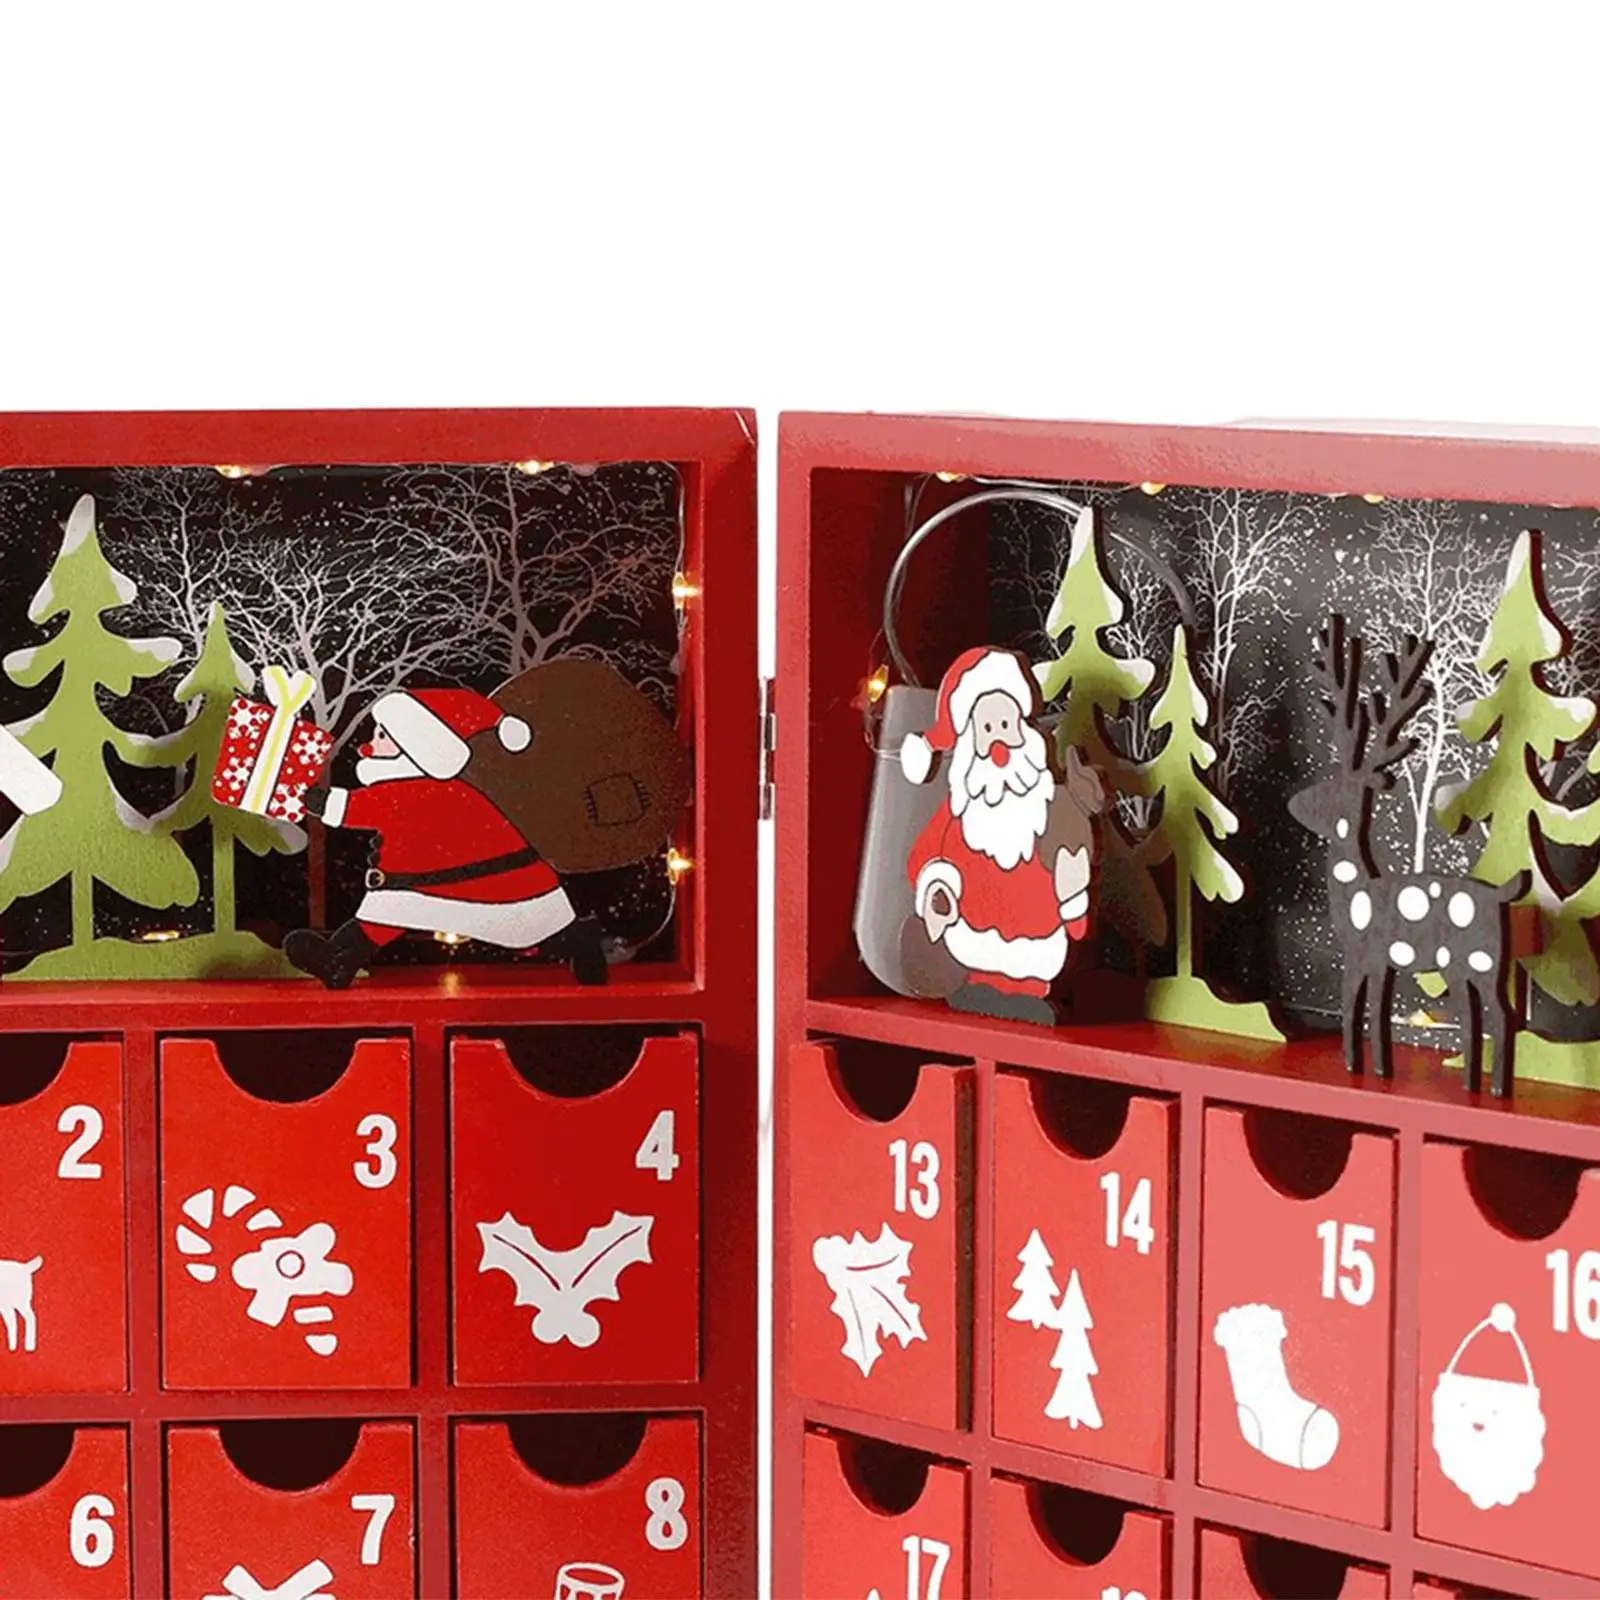 Fillable Advent Calendar Santa Claus Pattern Candy Organizer with Storage Drawers Wood for Holiday Xmas Desktop Home Decor